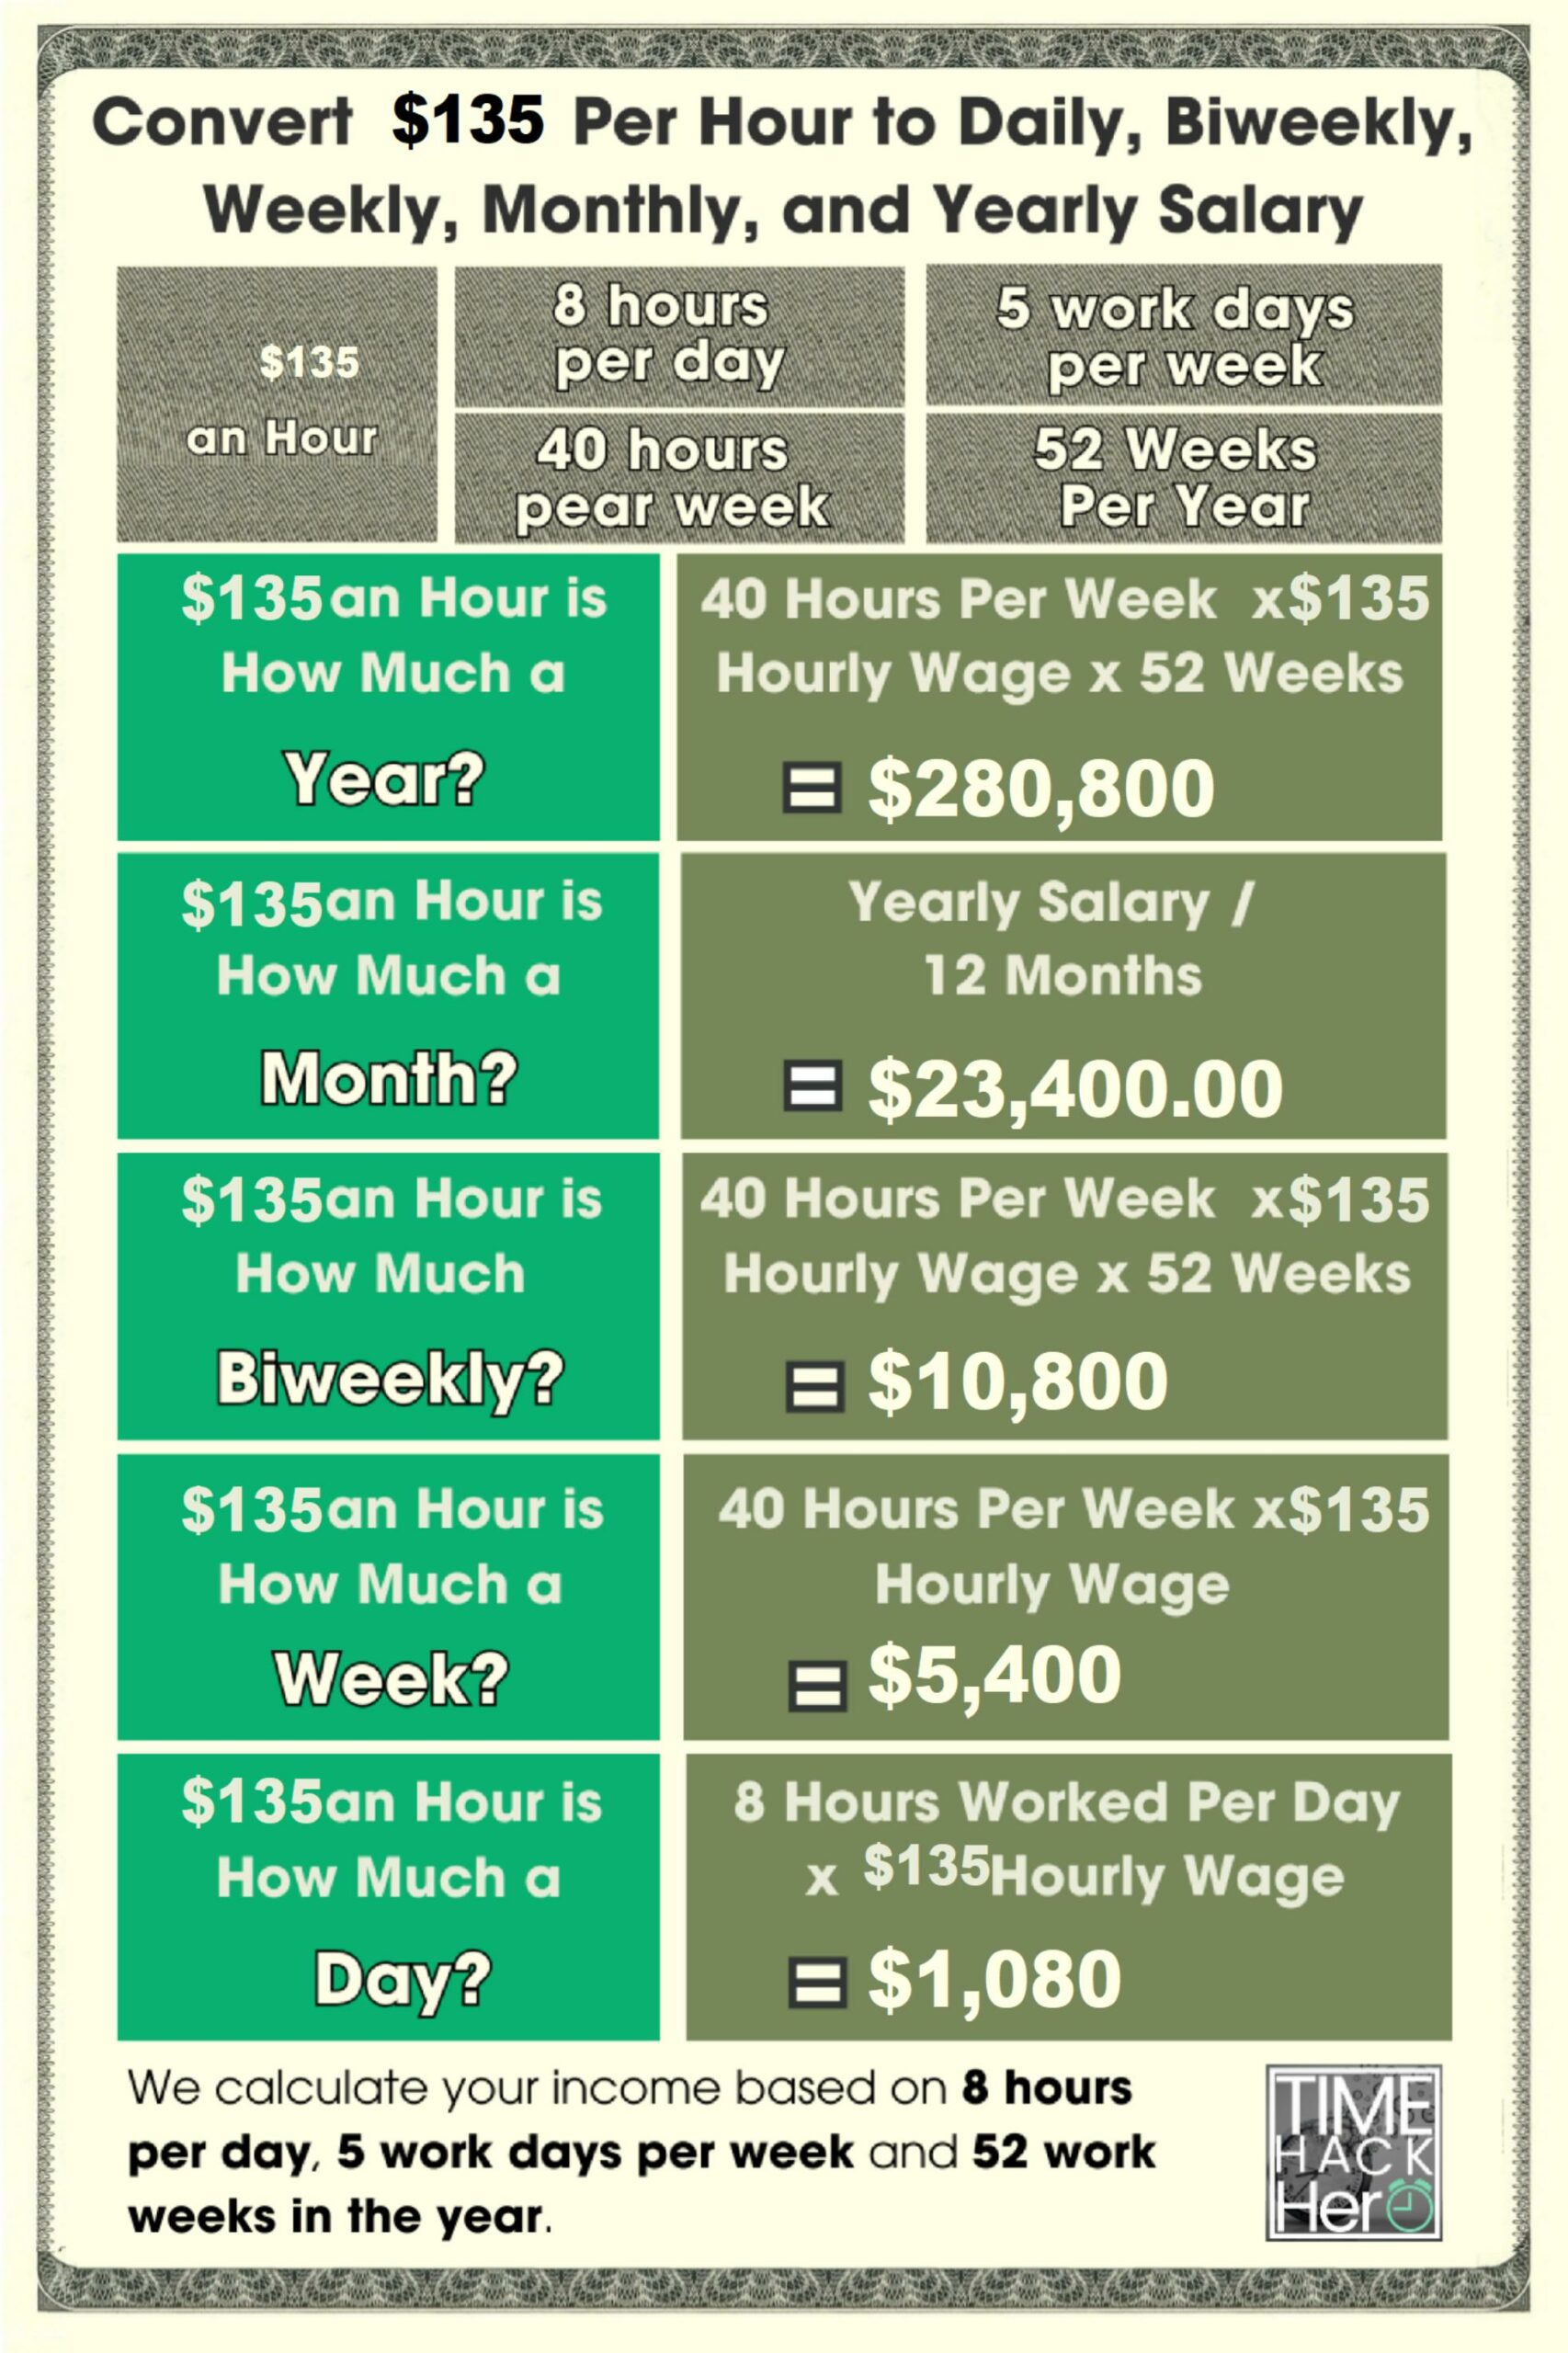 Convert $135 Per Hour to Weekly, Monthly, and Yearly Salary